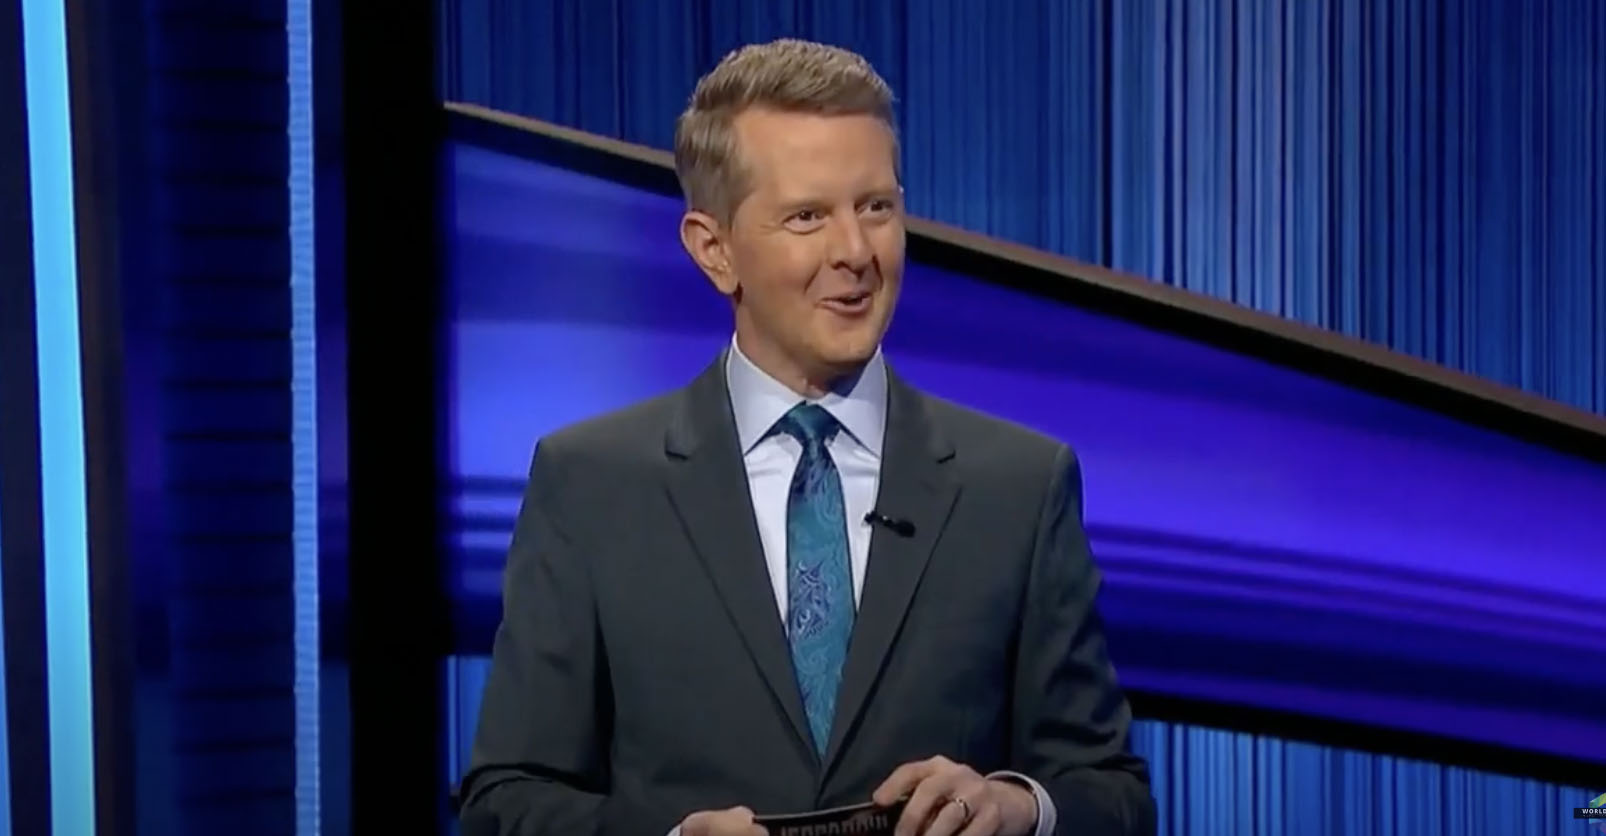 Even host Ken Jennings seemed impressed and so were fans, despite the contestant's past comments